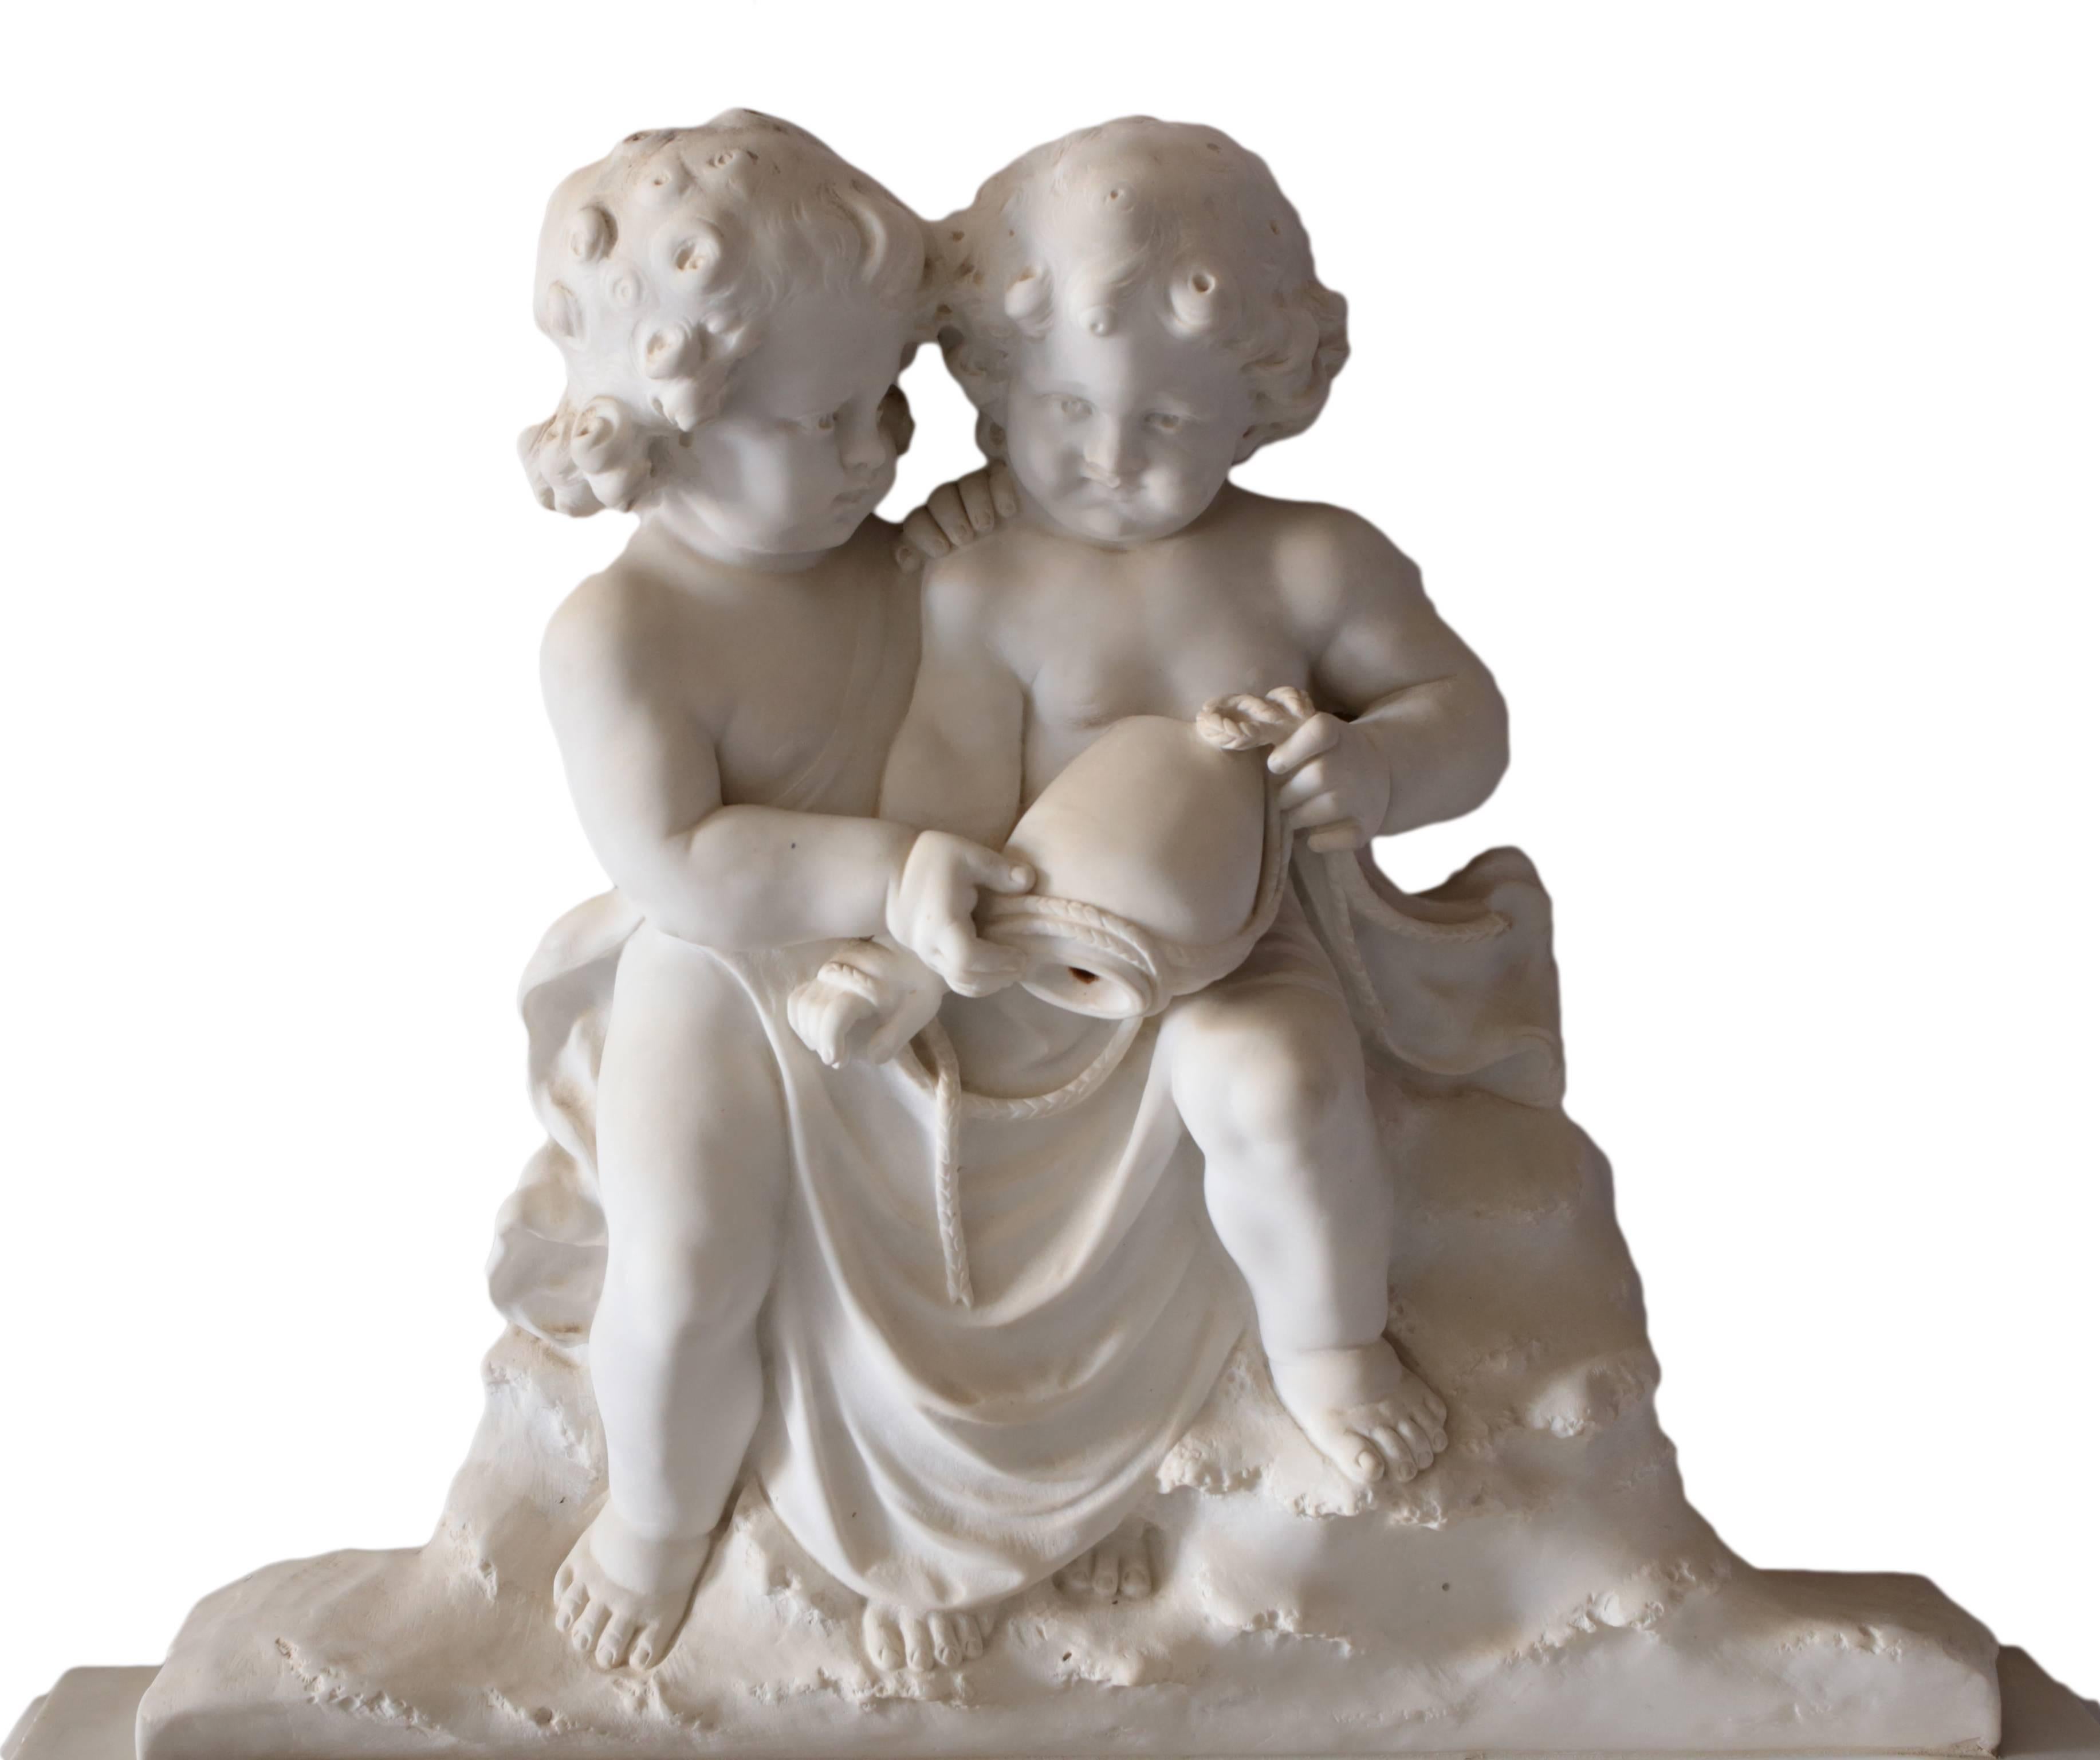 A 19th century Italian white marble fountain in the classical manner featuring a putti elevating a basin lined with grapes and vines to the underside. Sitting atop the bowl are a pair of young children, emptying an urn which serves as the water